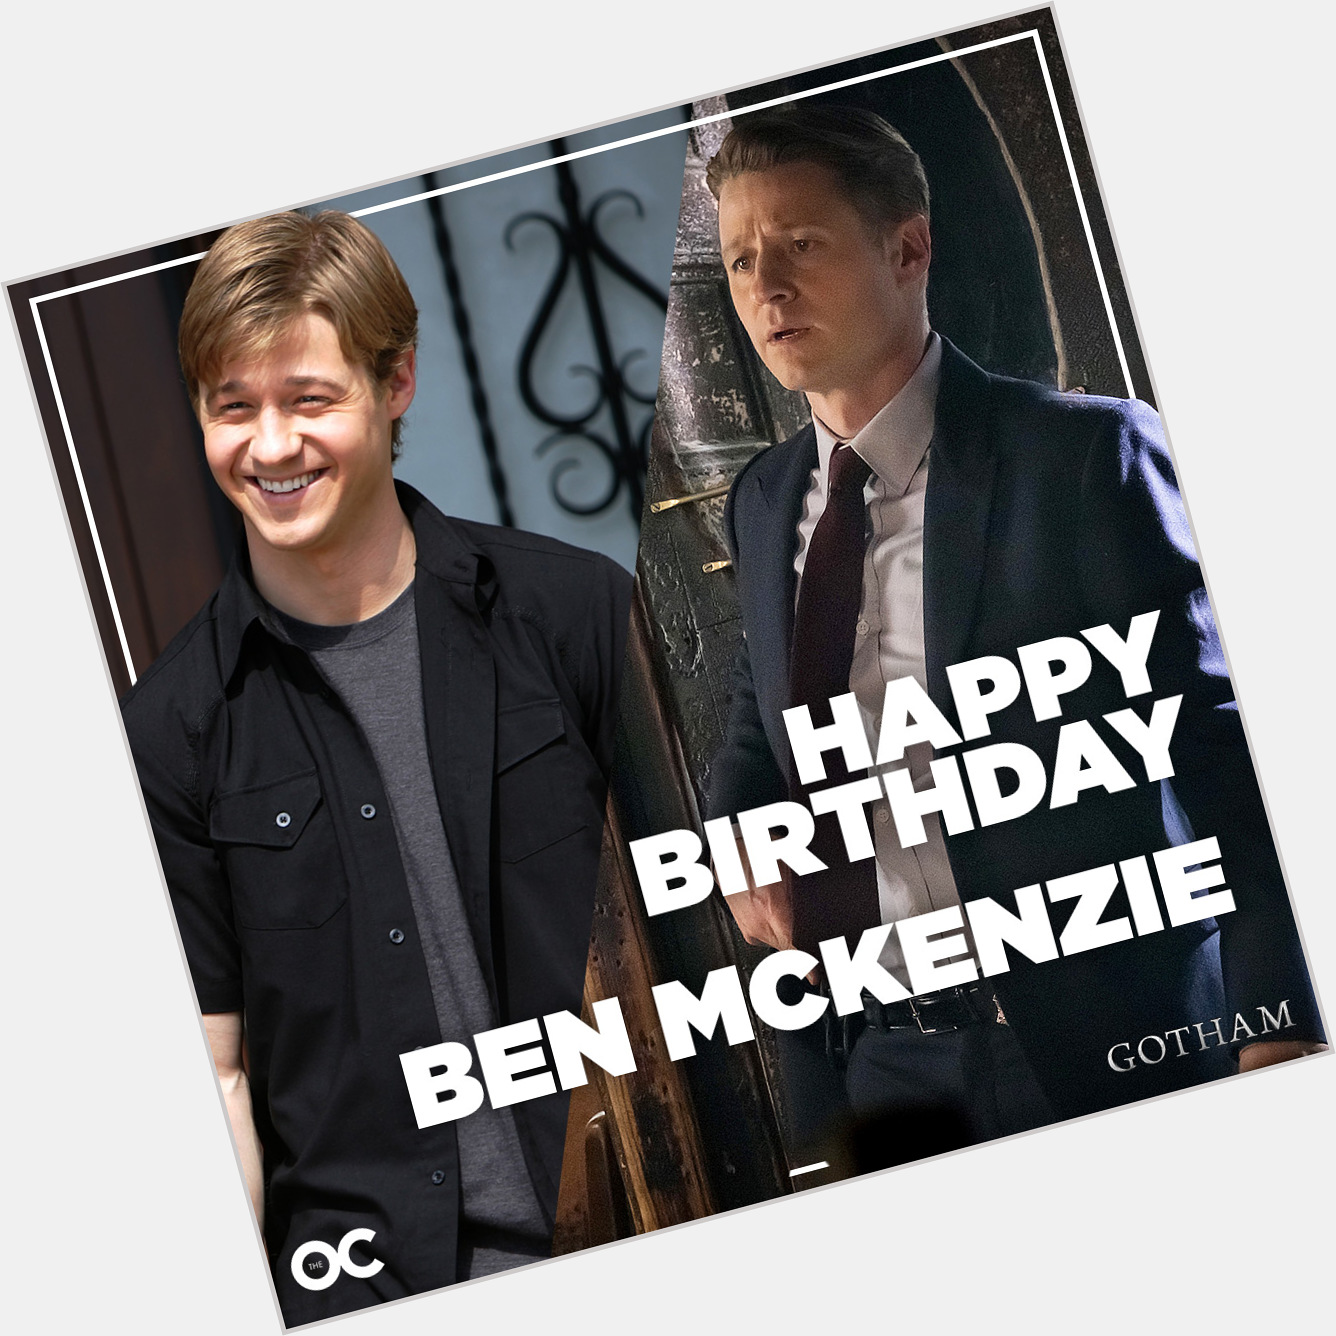 Whether he is Ryan Atwood or Jim Gordon to you, Happy Birthday 